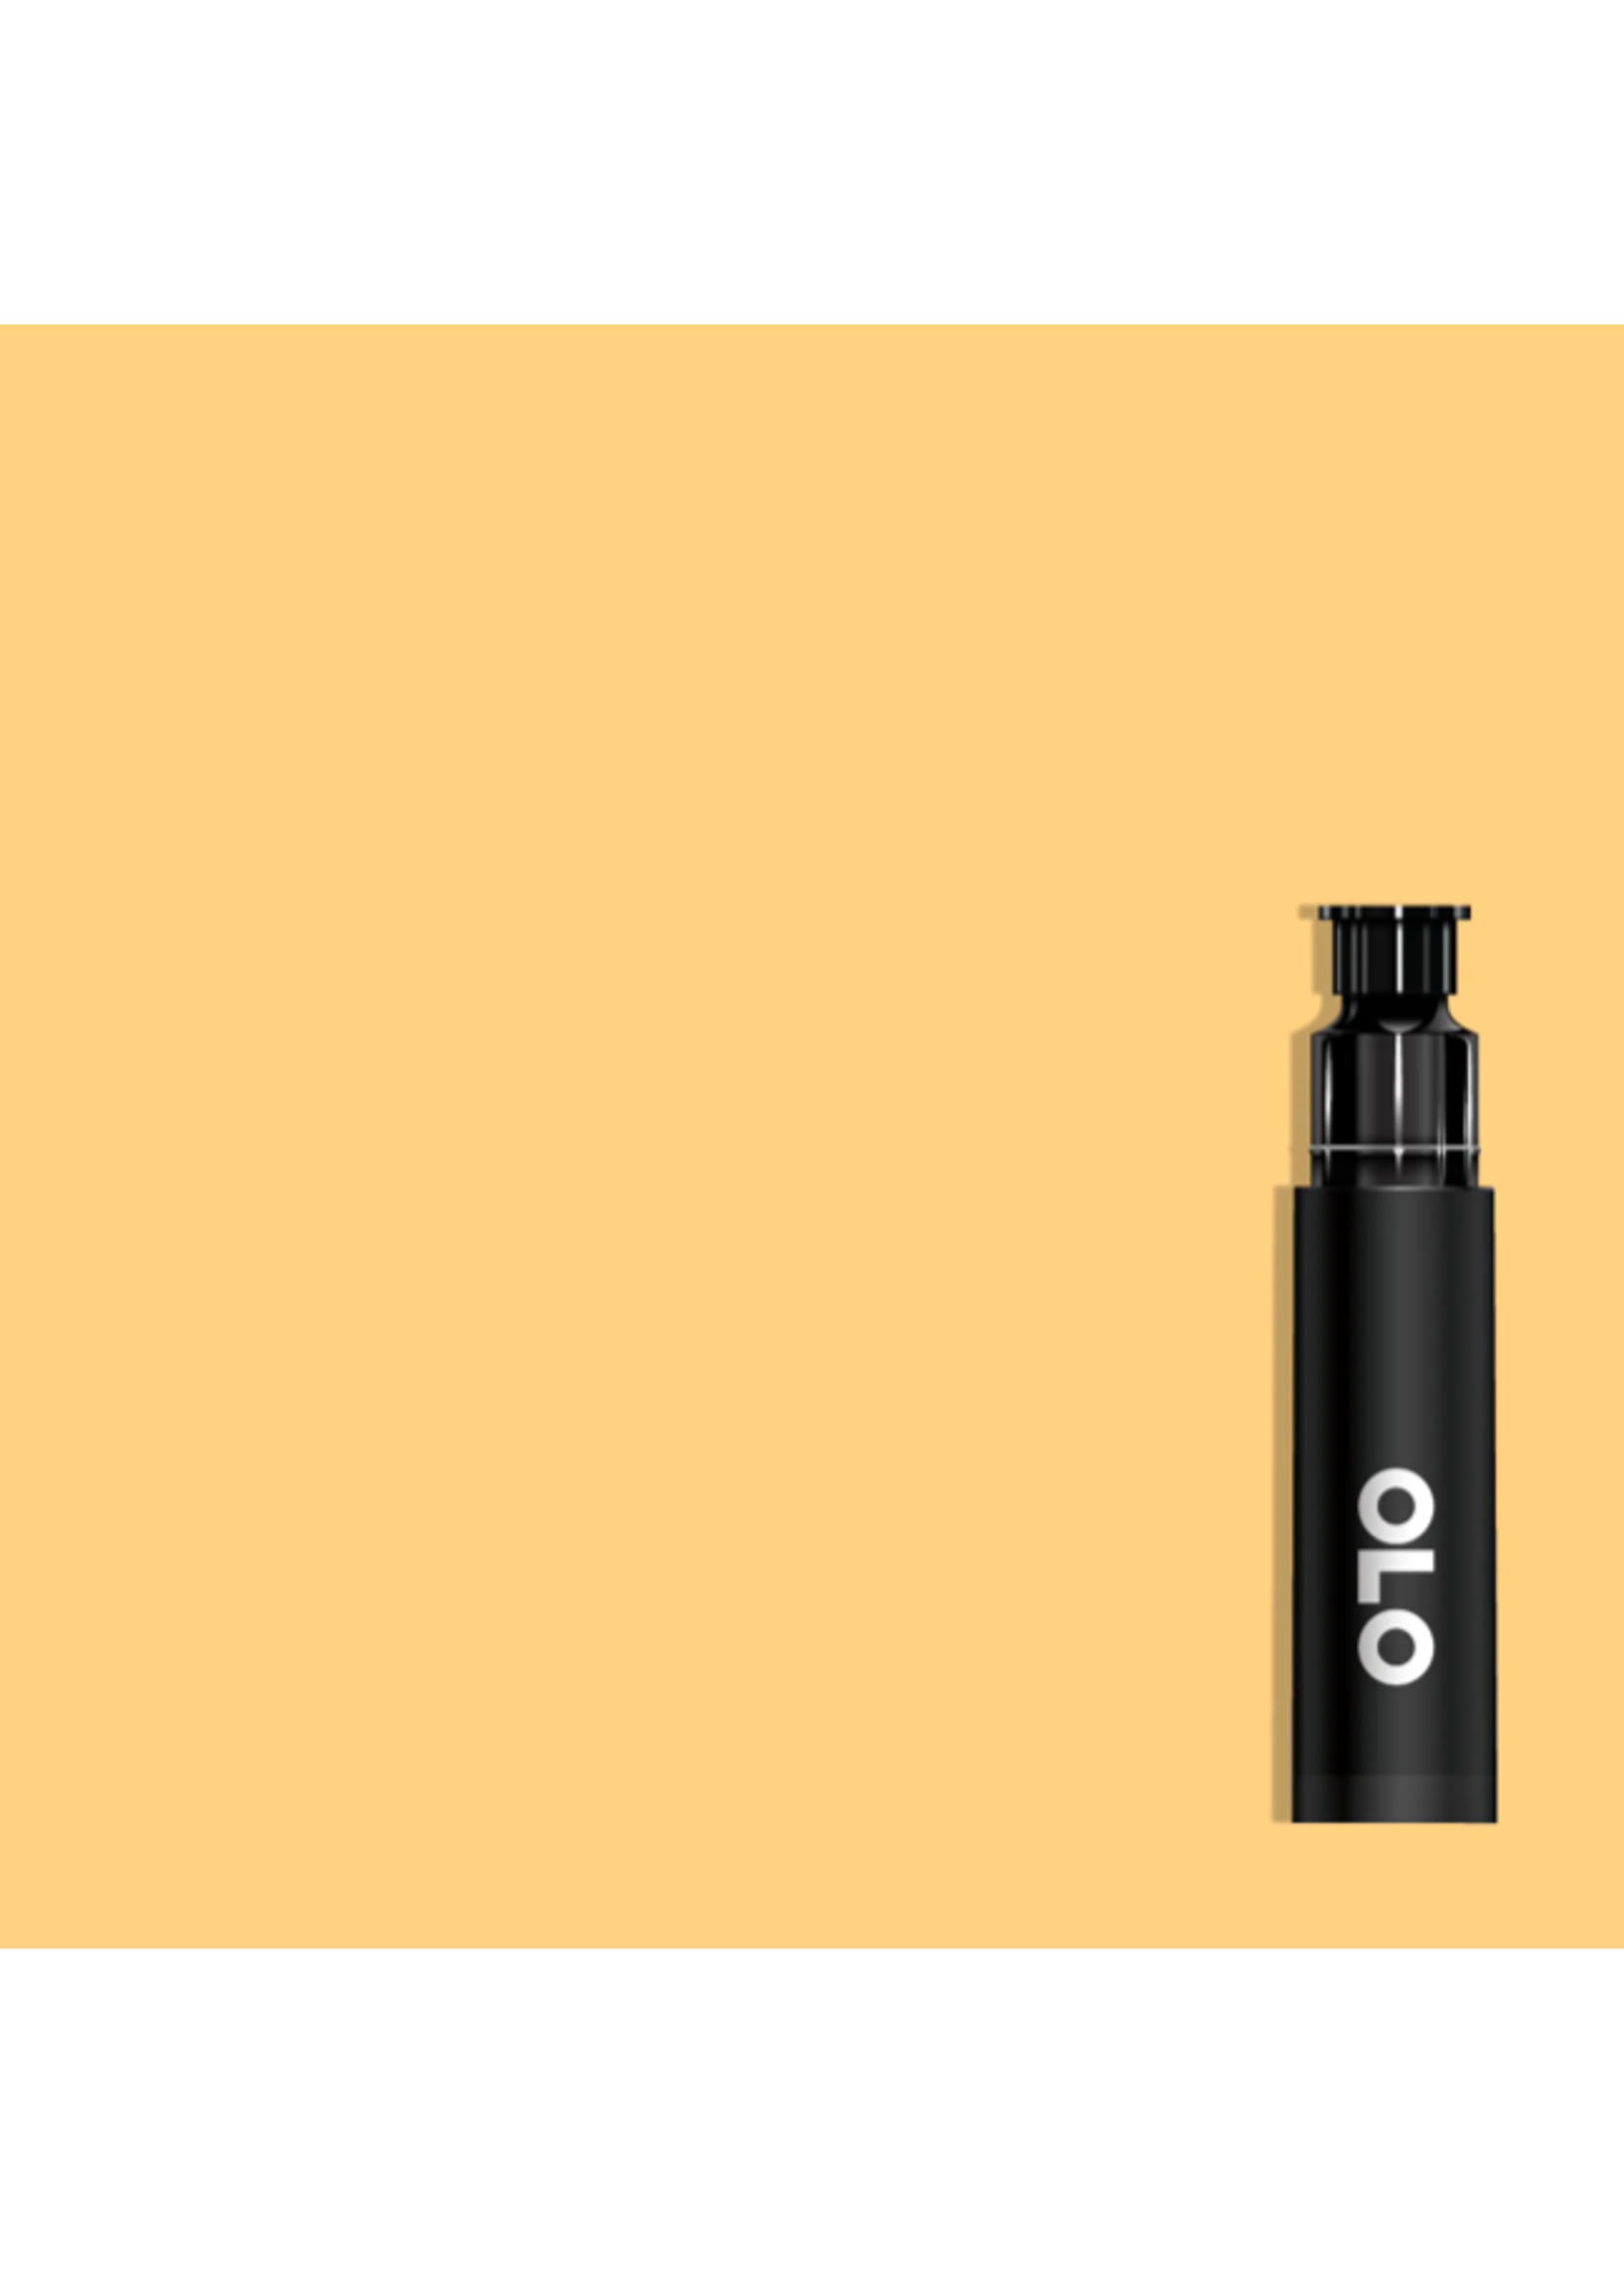 OLO OLO Brush Replacement Cartridge: Pudding